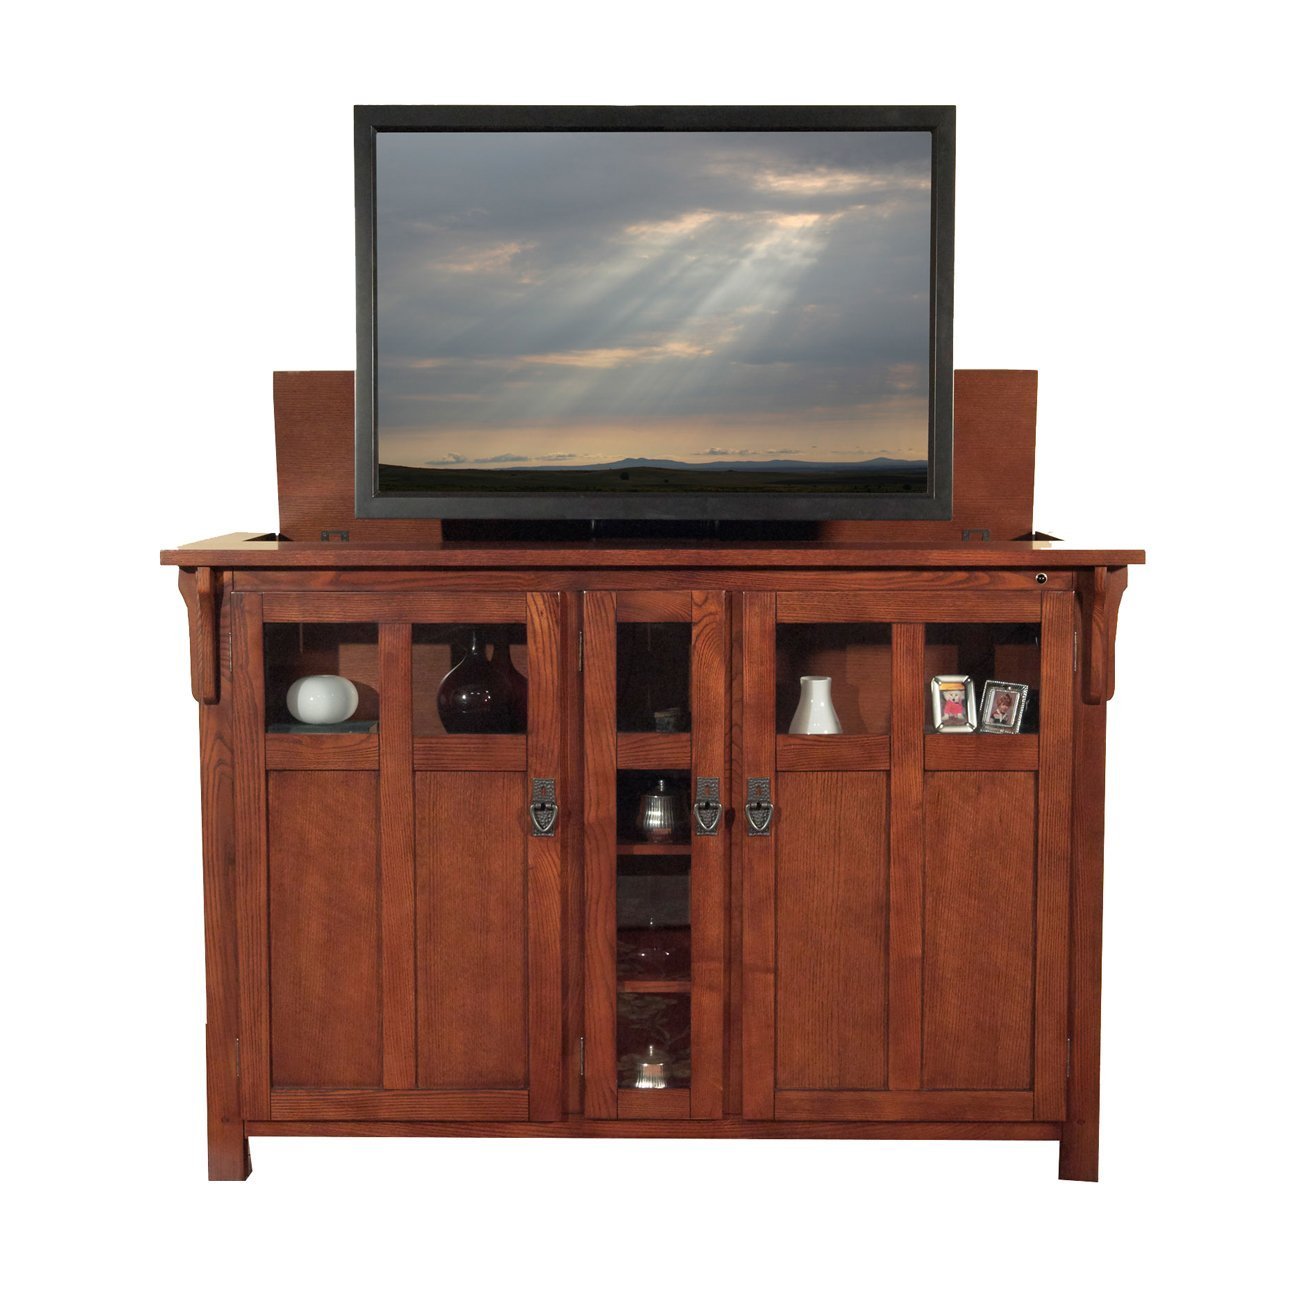 Exclusive touchstone 70062 bungalow tv lift cabinet chestnut oak up to 60 inch tvs diagonal 55 in wide mission style motorized tv cabinet pop up tv cabinet with memory feature ir rf 12v trigger